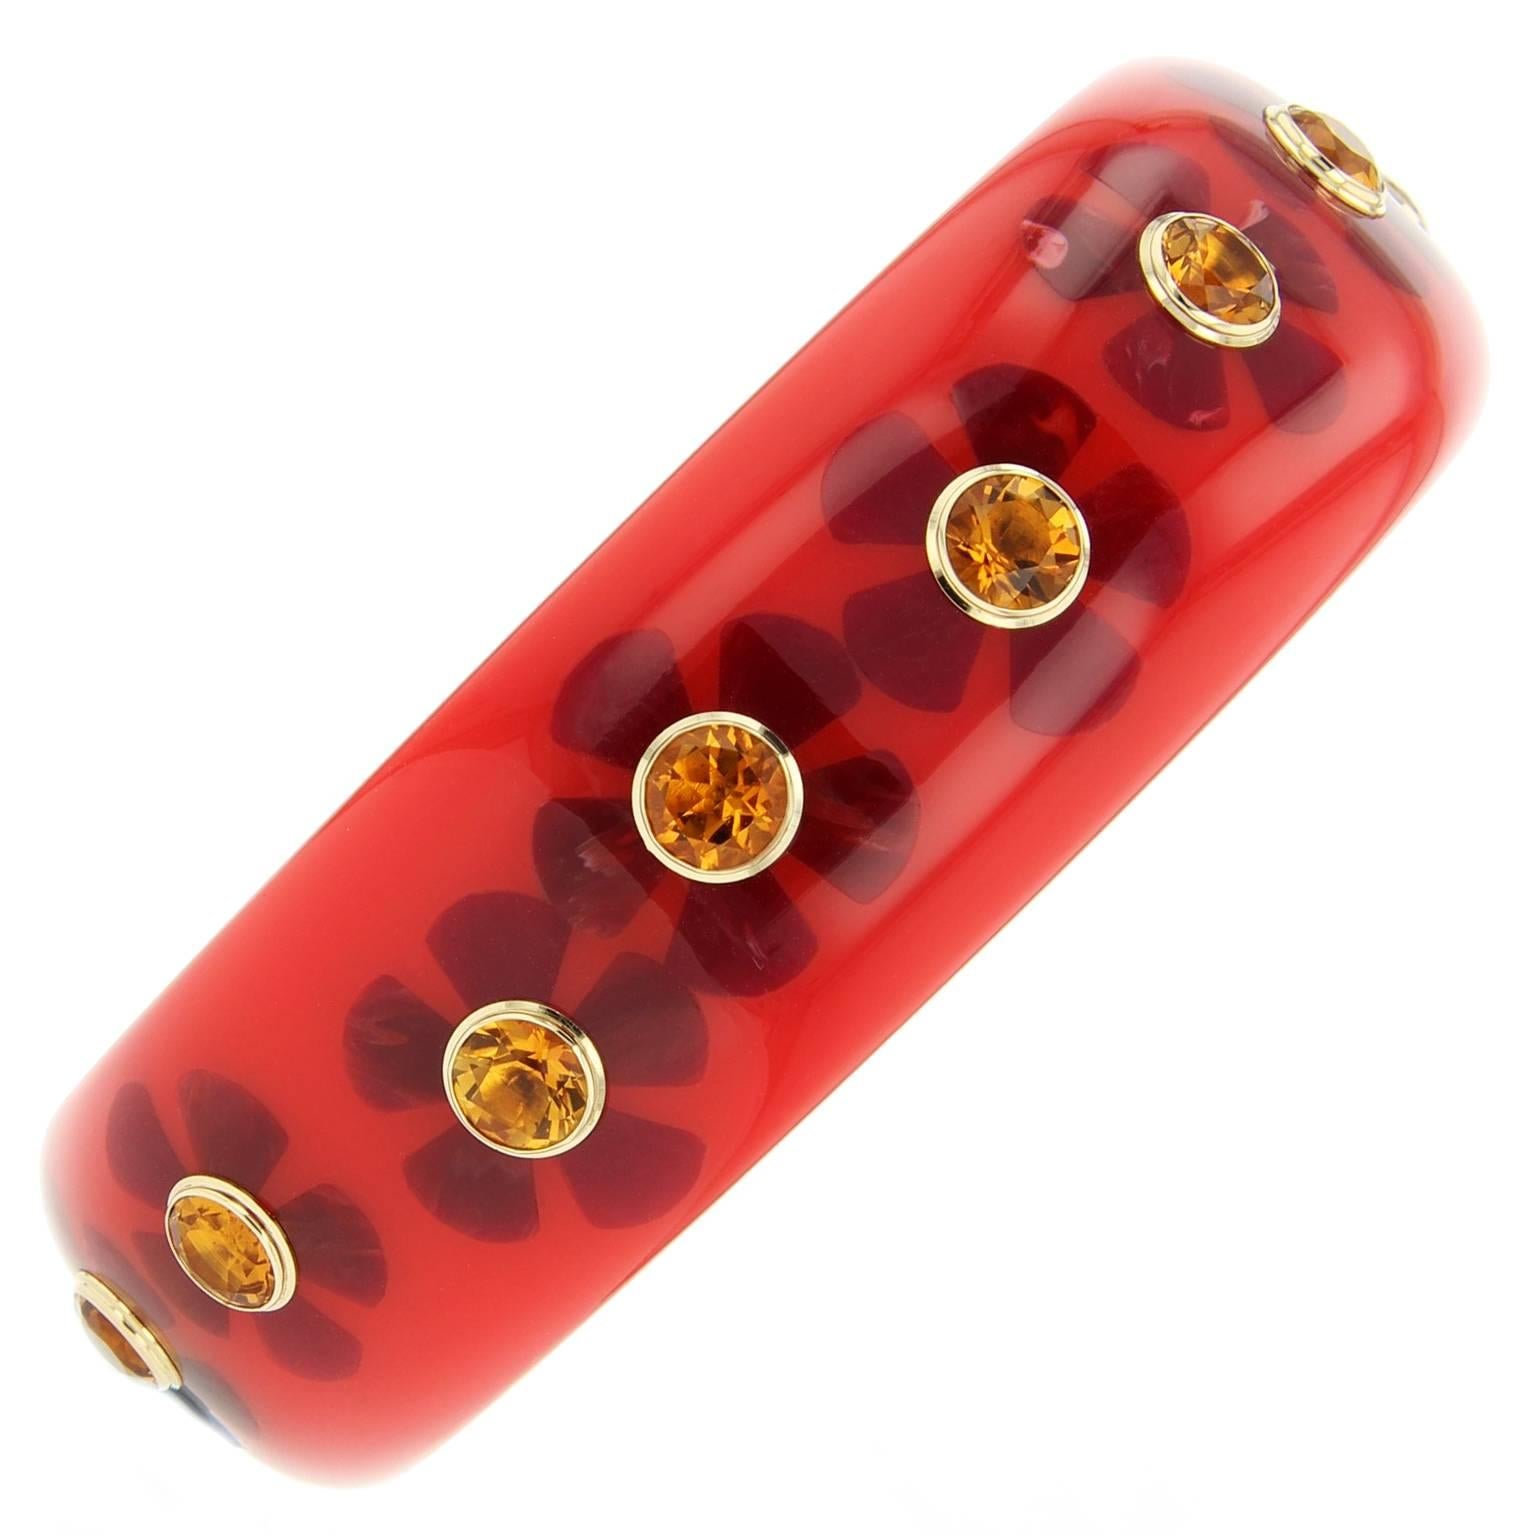 This cheerful Mark Davis bangle is handcrafted of red vintage bakelite and finely inlaid with burgundy bakelite flowers.  At the center of each flower is a large citrine bezel set in 18k yellow gold. 

Full details below: 
• Part of the Mark Davis